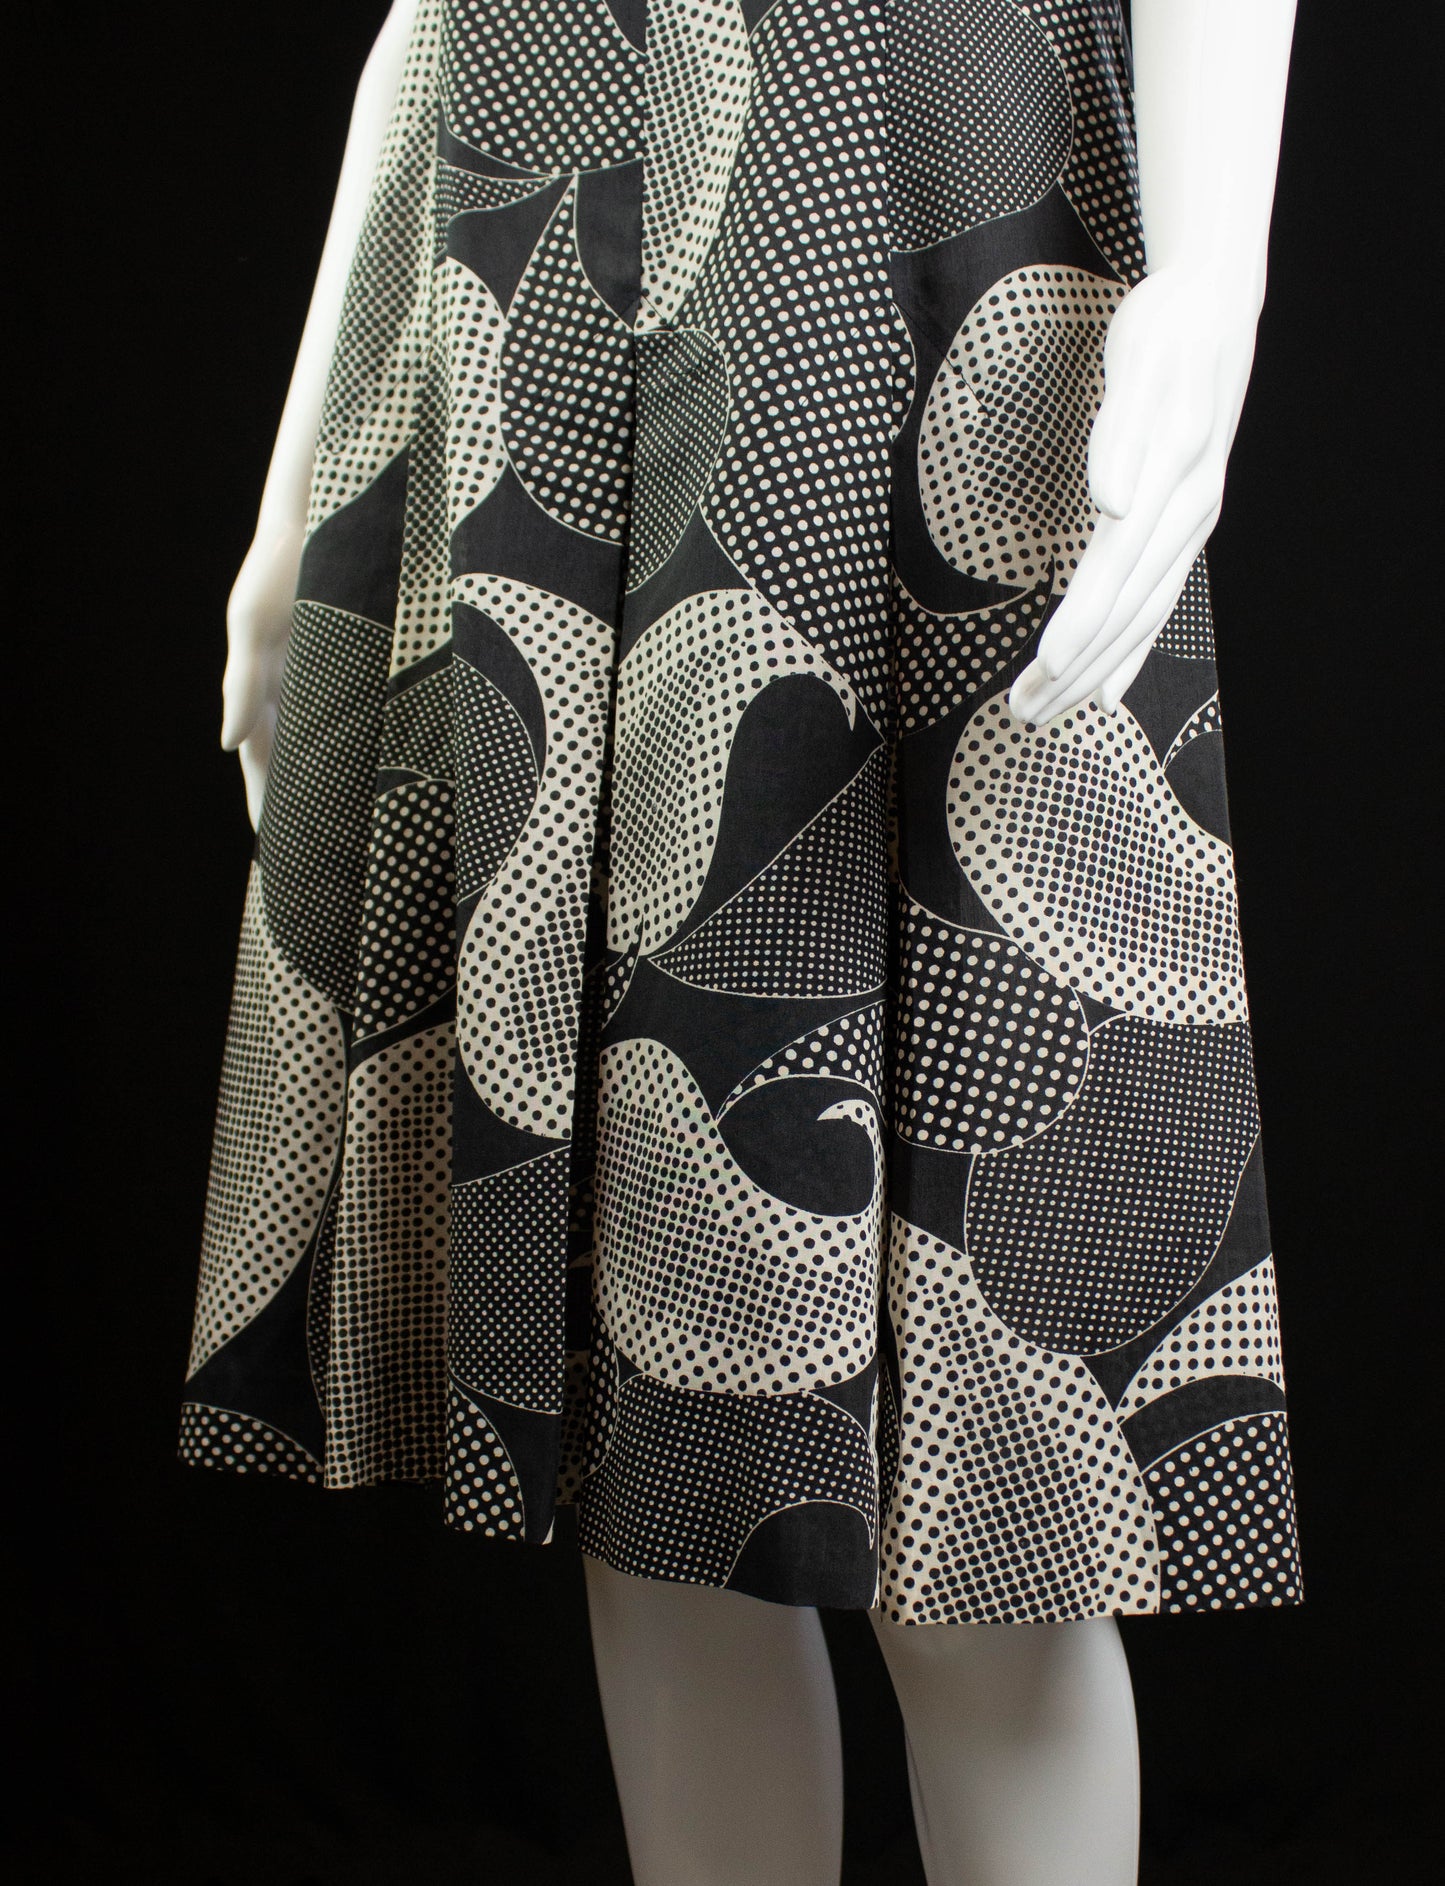 Vintage Abstract Polka Dot Dress With Pleated Skirt 60s Black and White Medium